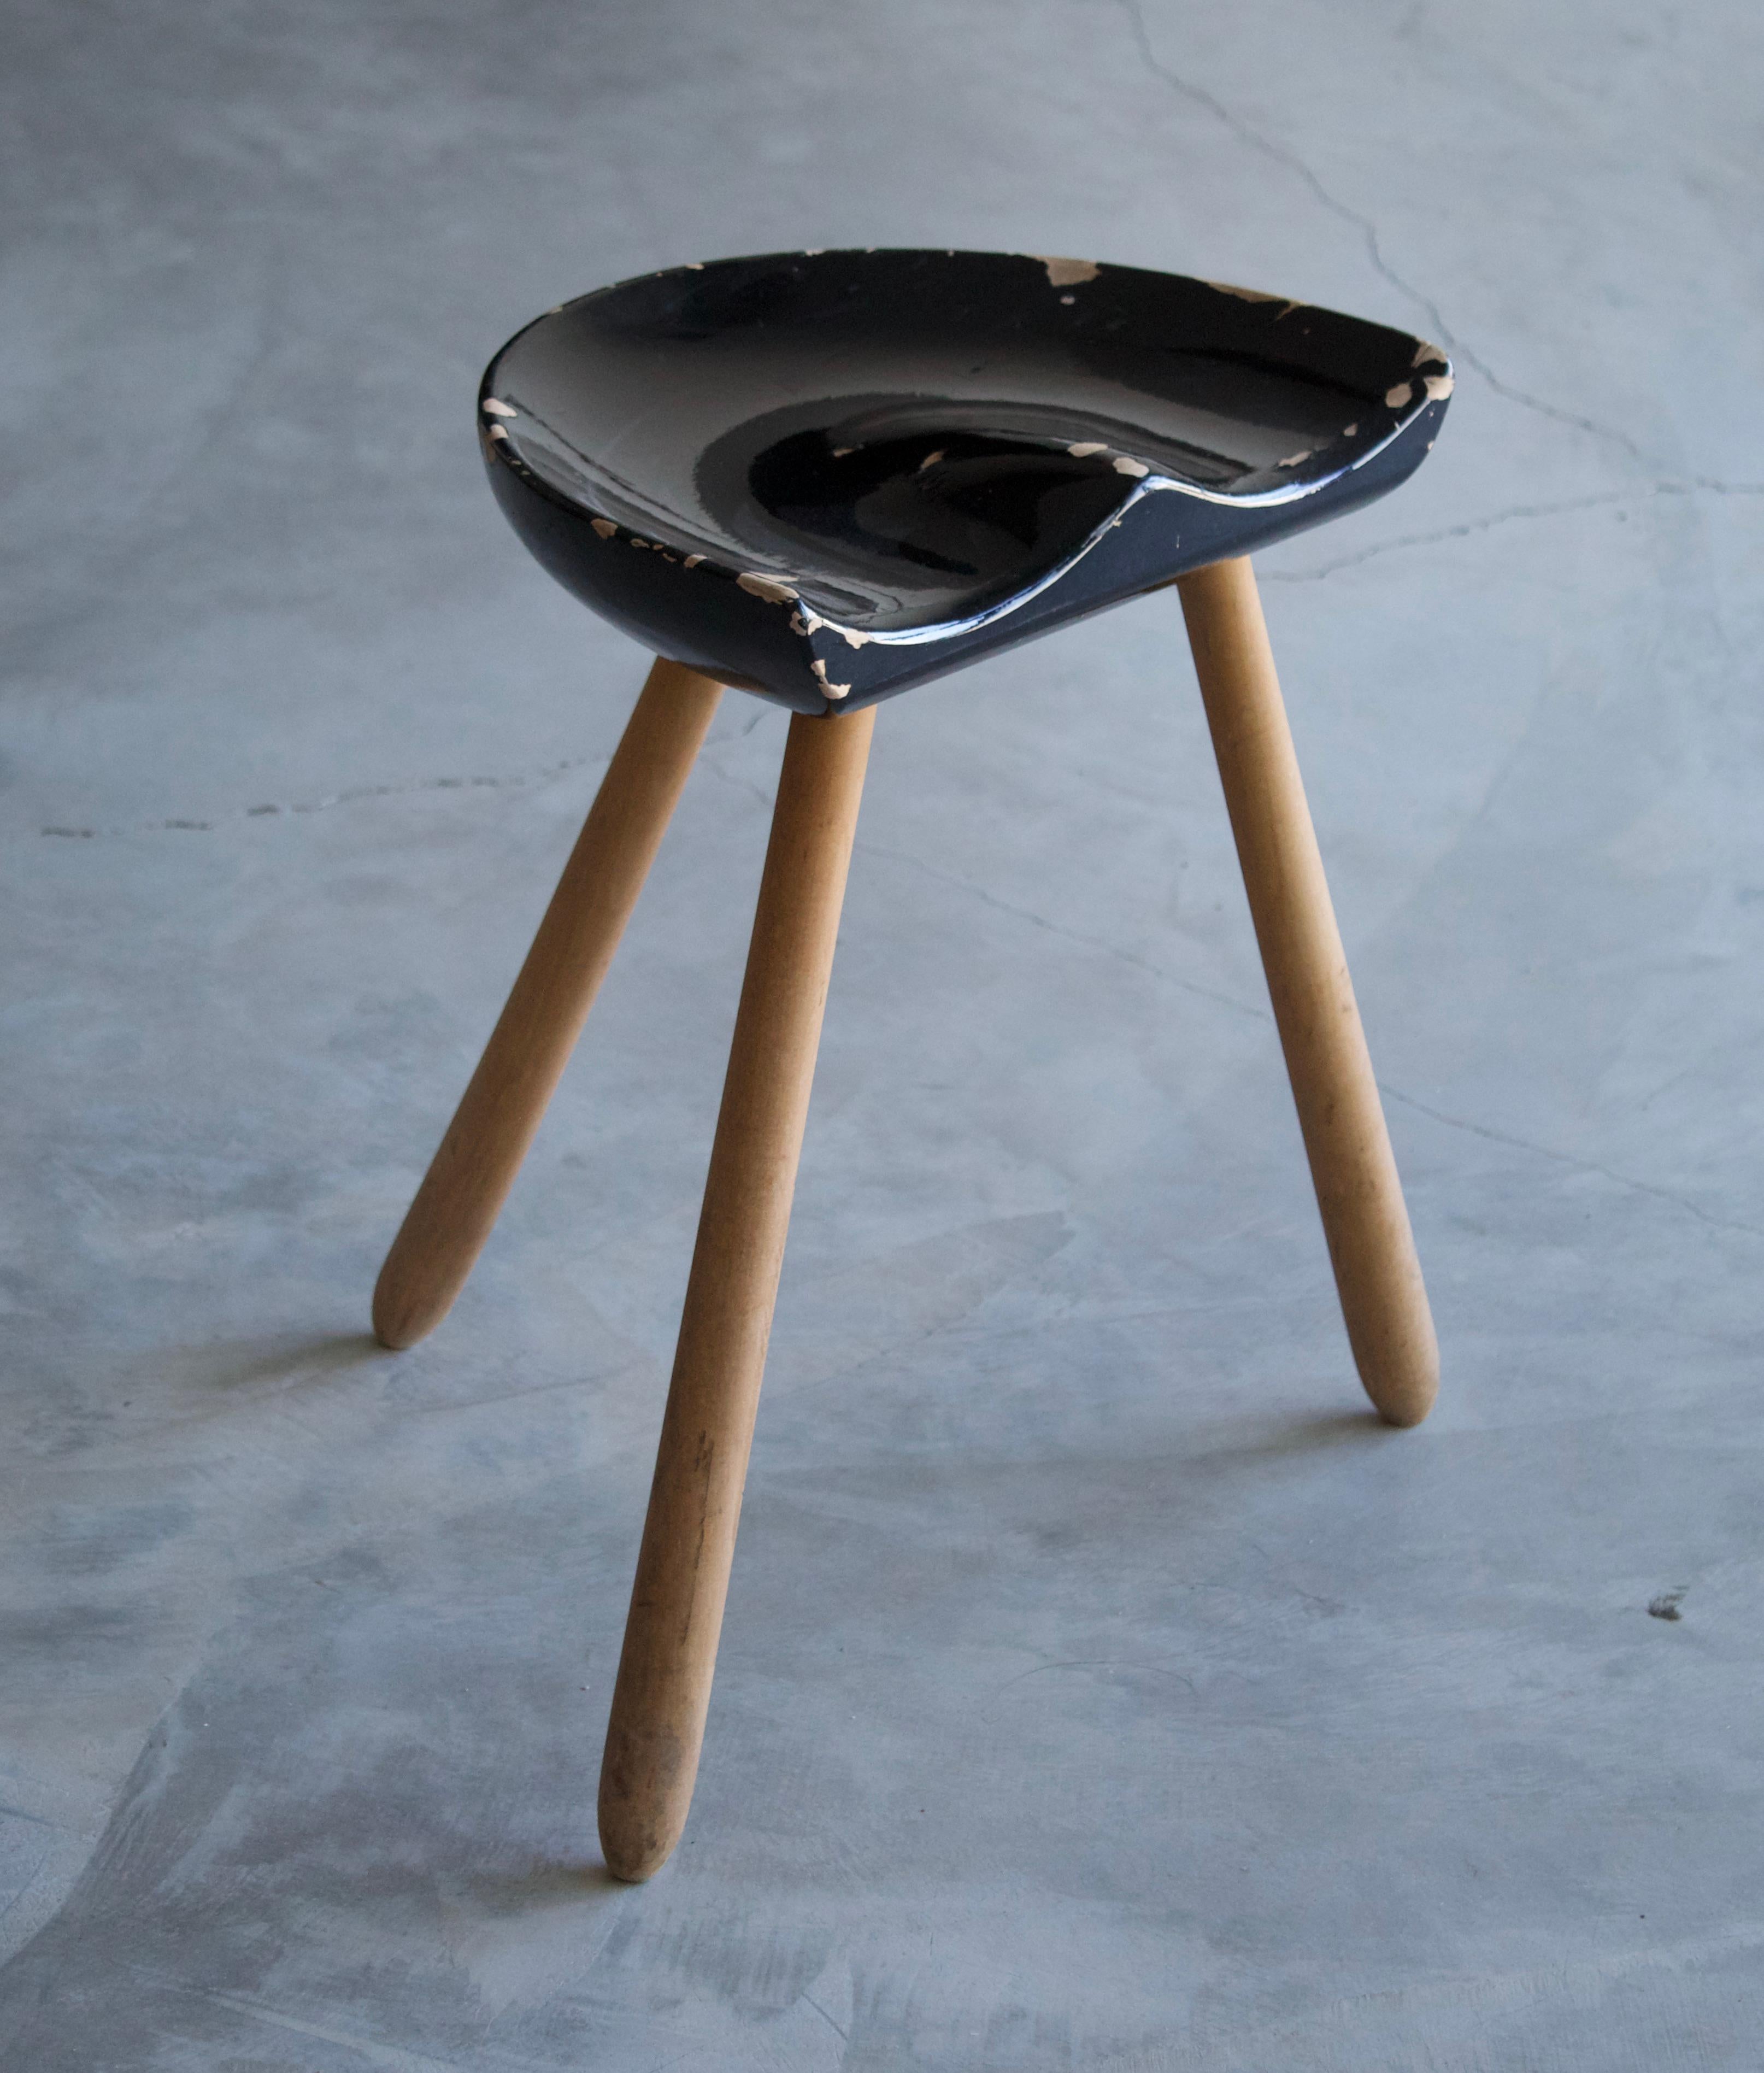 A finely carved and turned oak stool with black-lacquered seat. Produced in Denmark, c. 1950s.

Other designers of the period include Mogens Lassen, Josef Frank, Arne Jacobsen, Finn Juhl, and Philip Arctander.

 